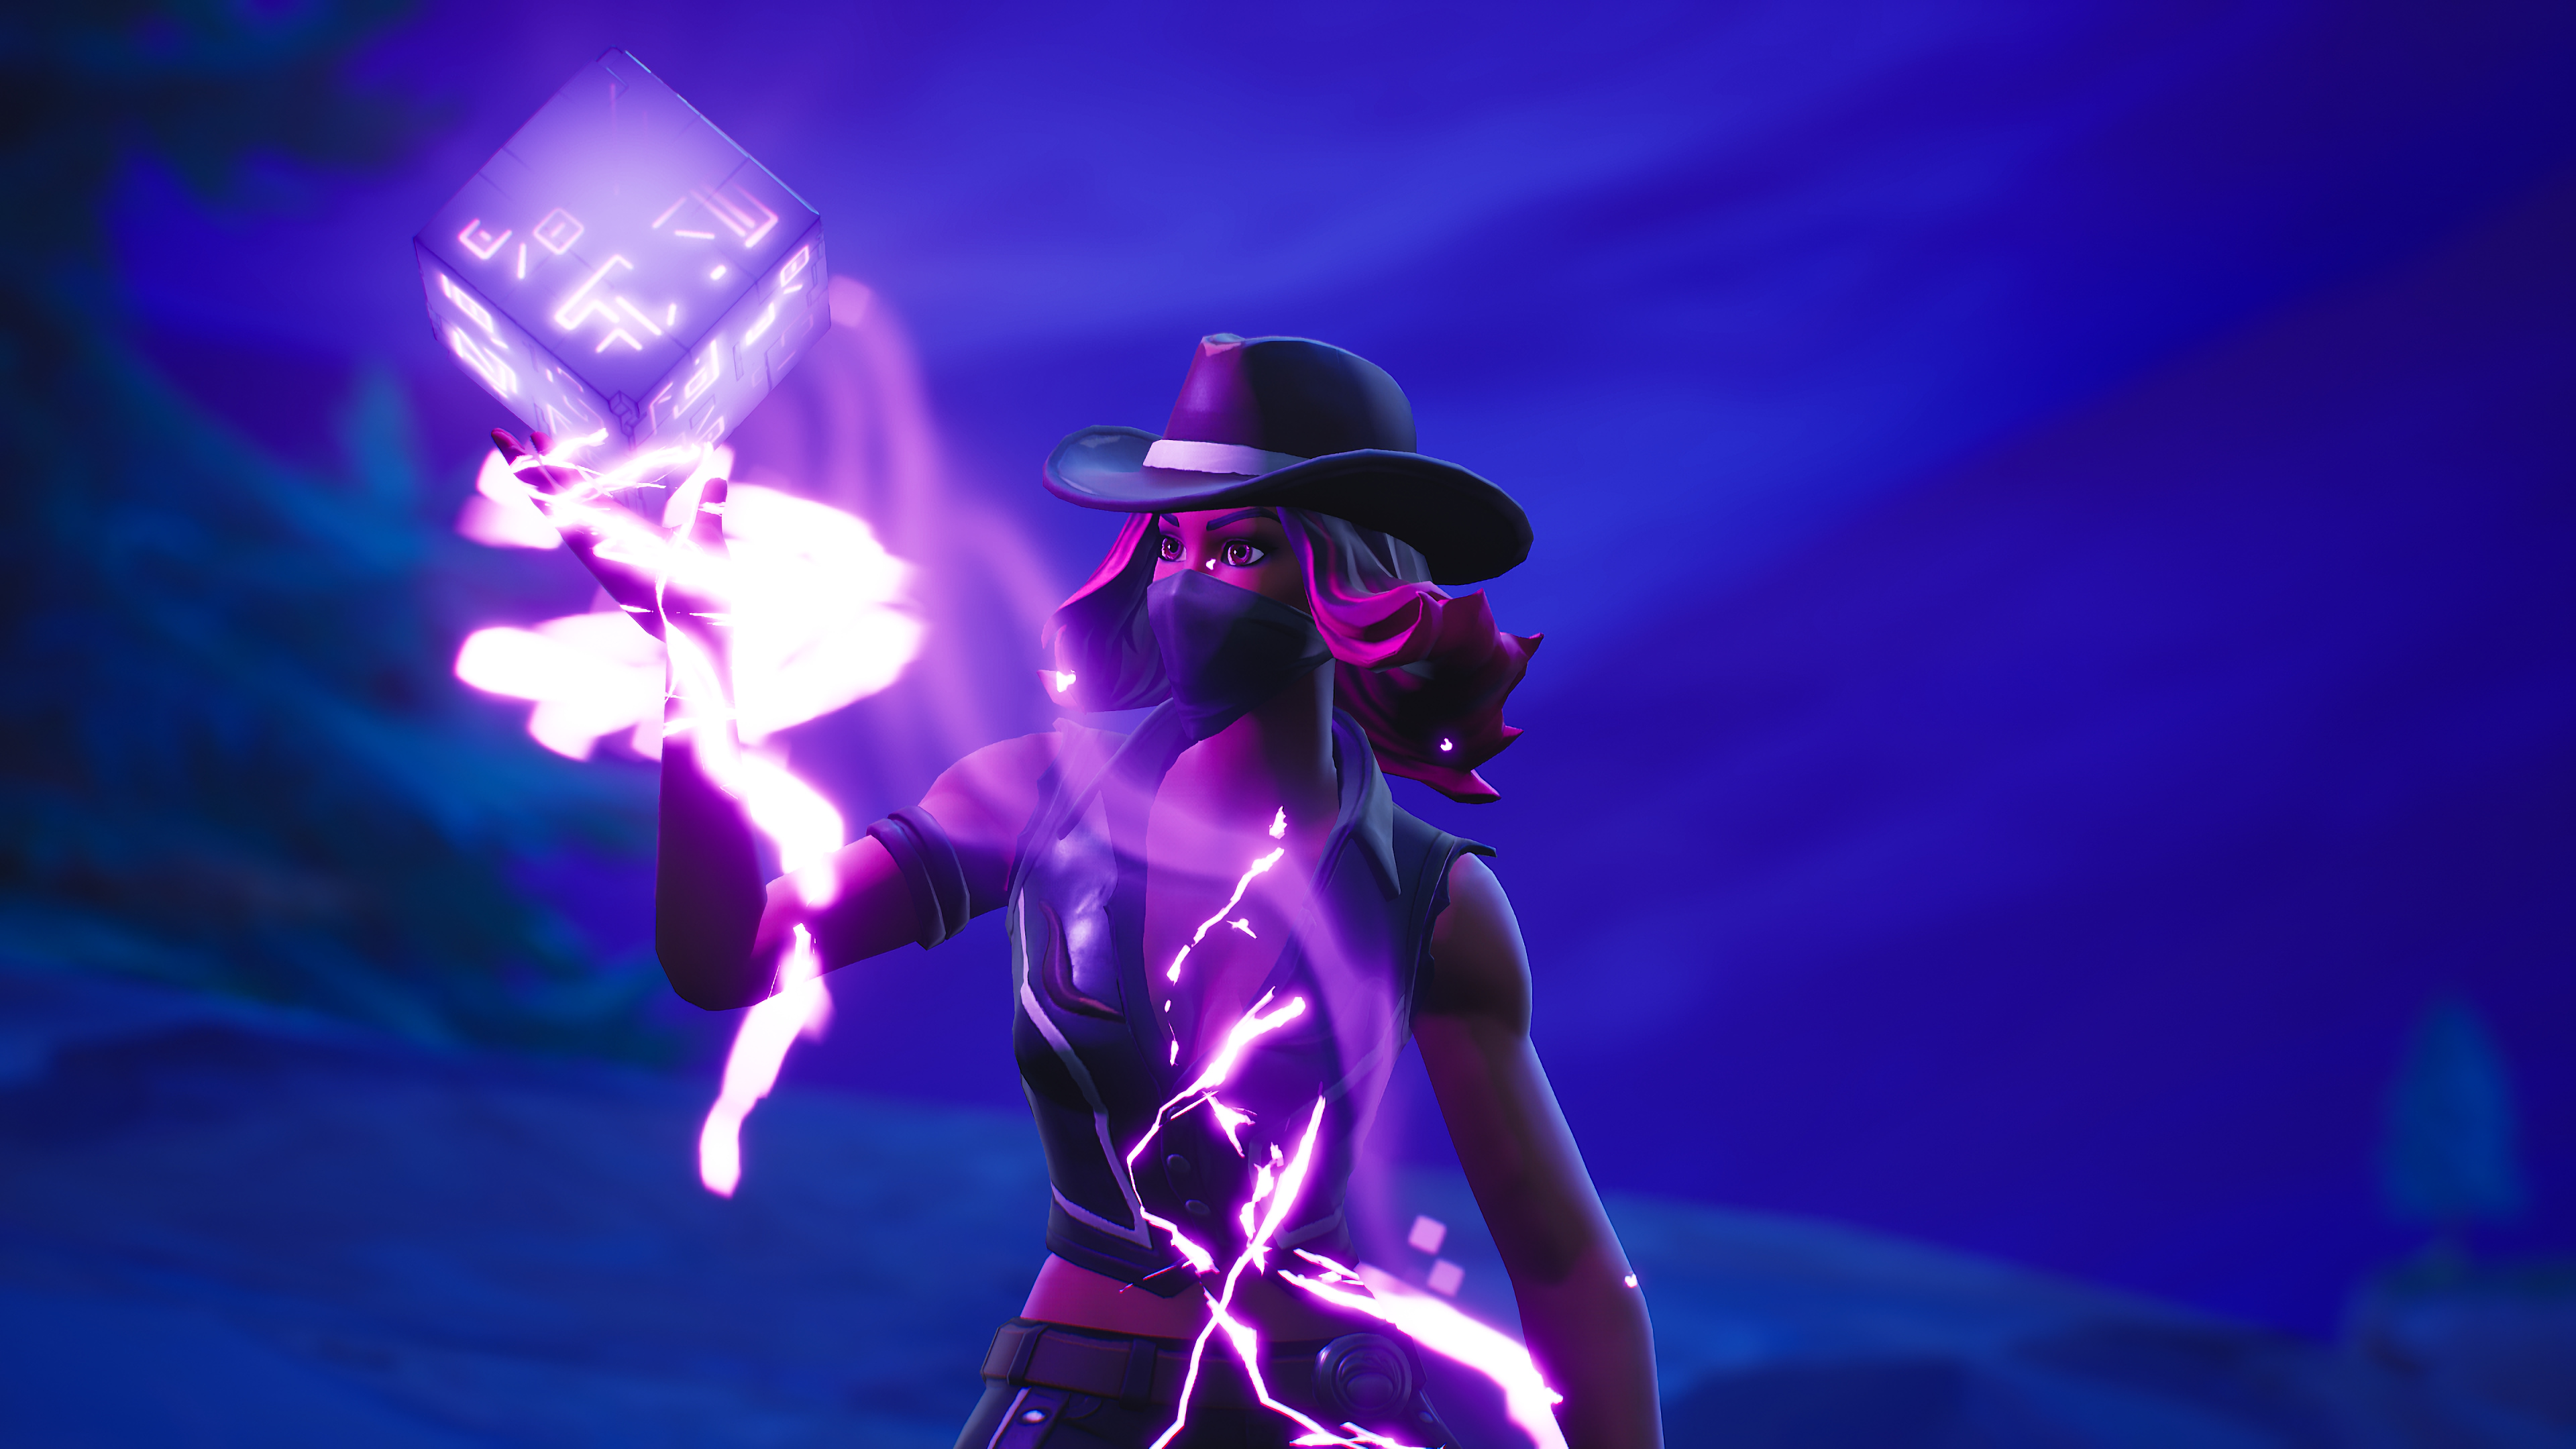 fortnite players will get exclusive cosmetic items for reaching level 100 - fortnite level 100 reward season 7